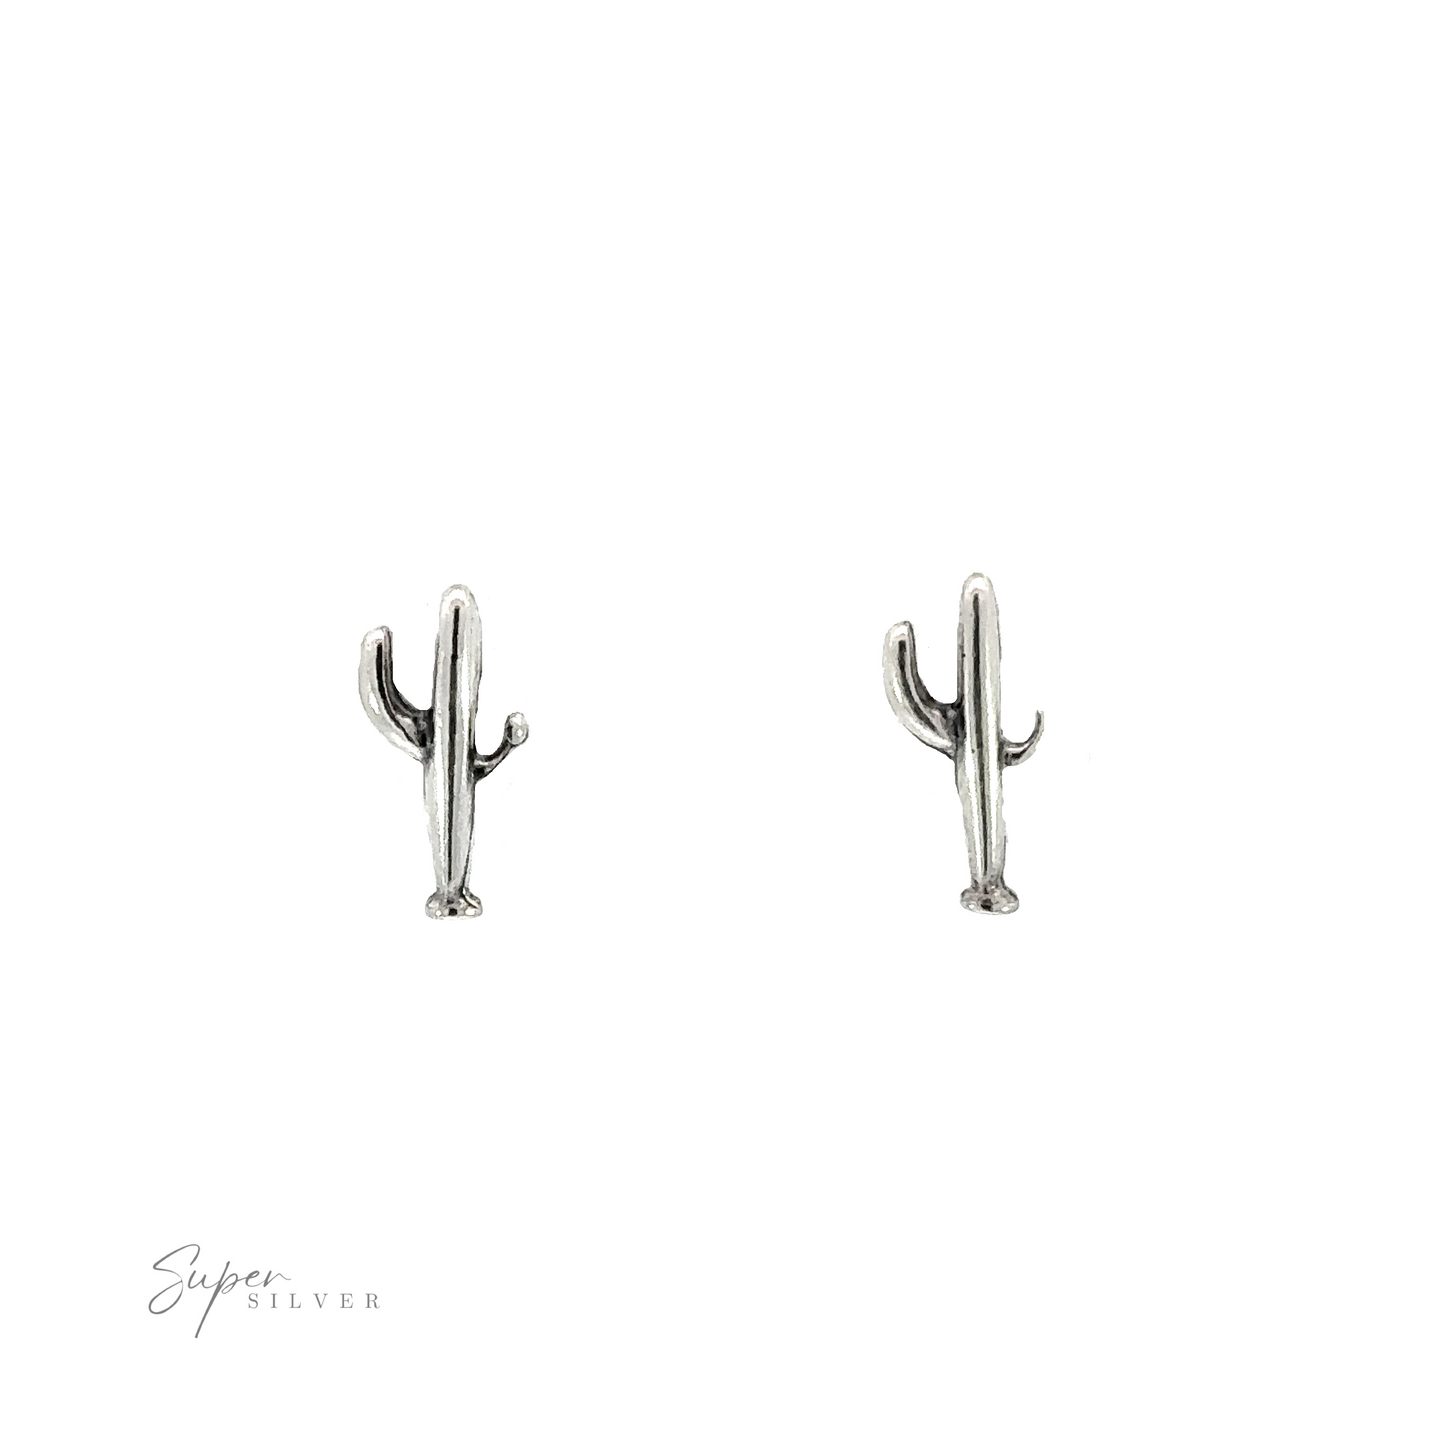 A pair of southwestern style sterling silver Cactus Studs on a white background.